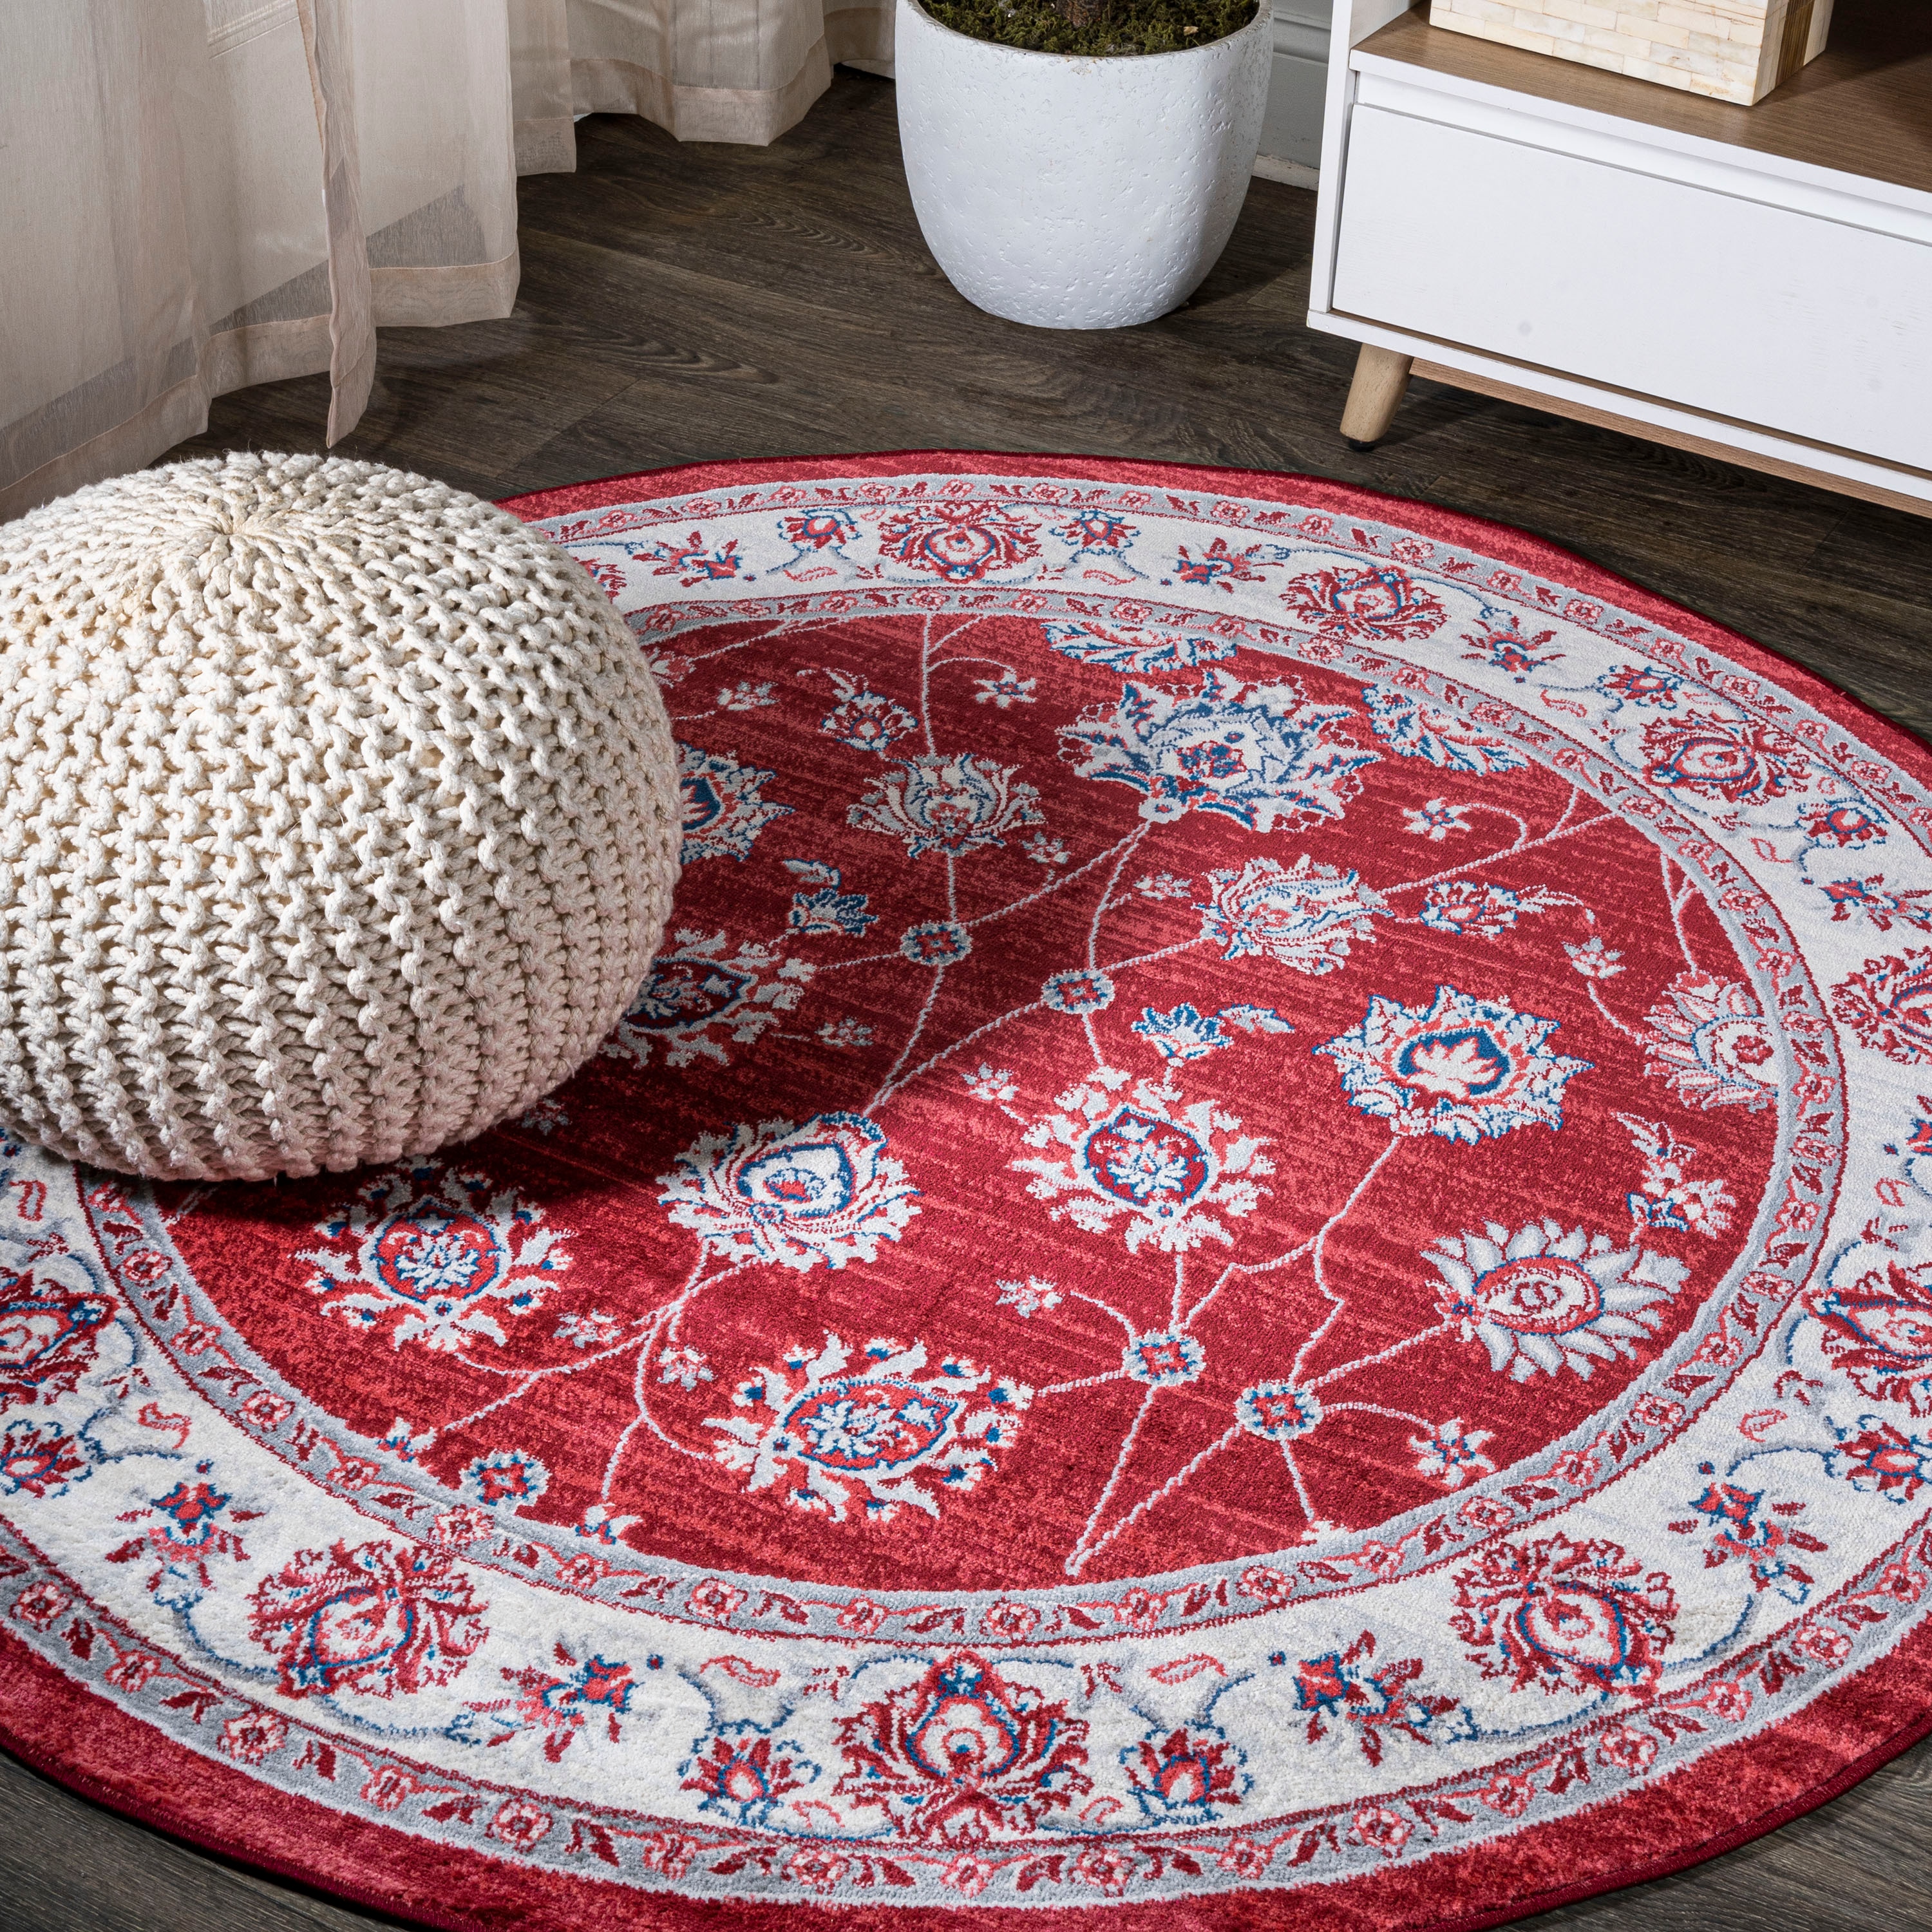 6' Round Oushak Red Rug, All Over Pattern Industrial Modern